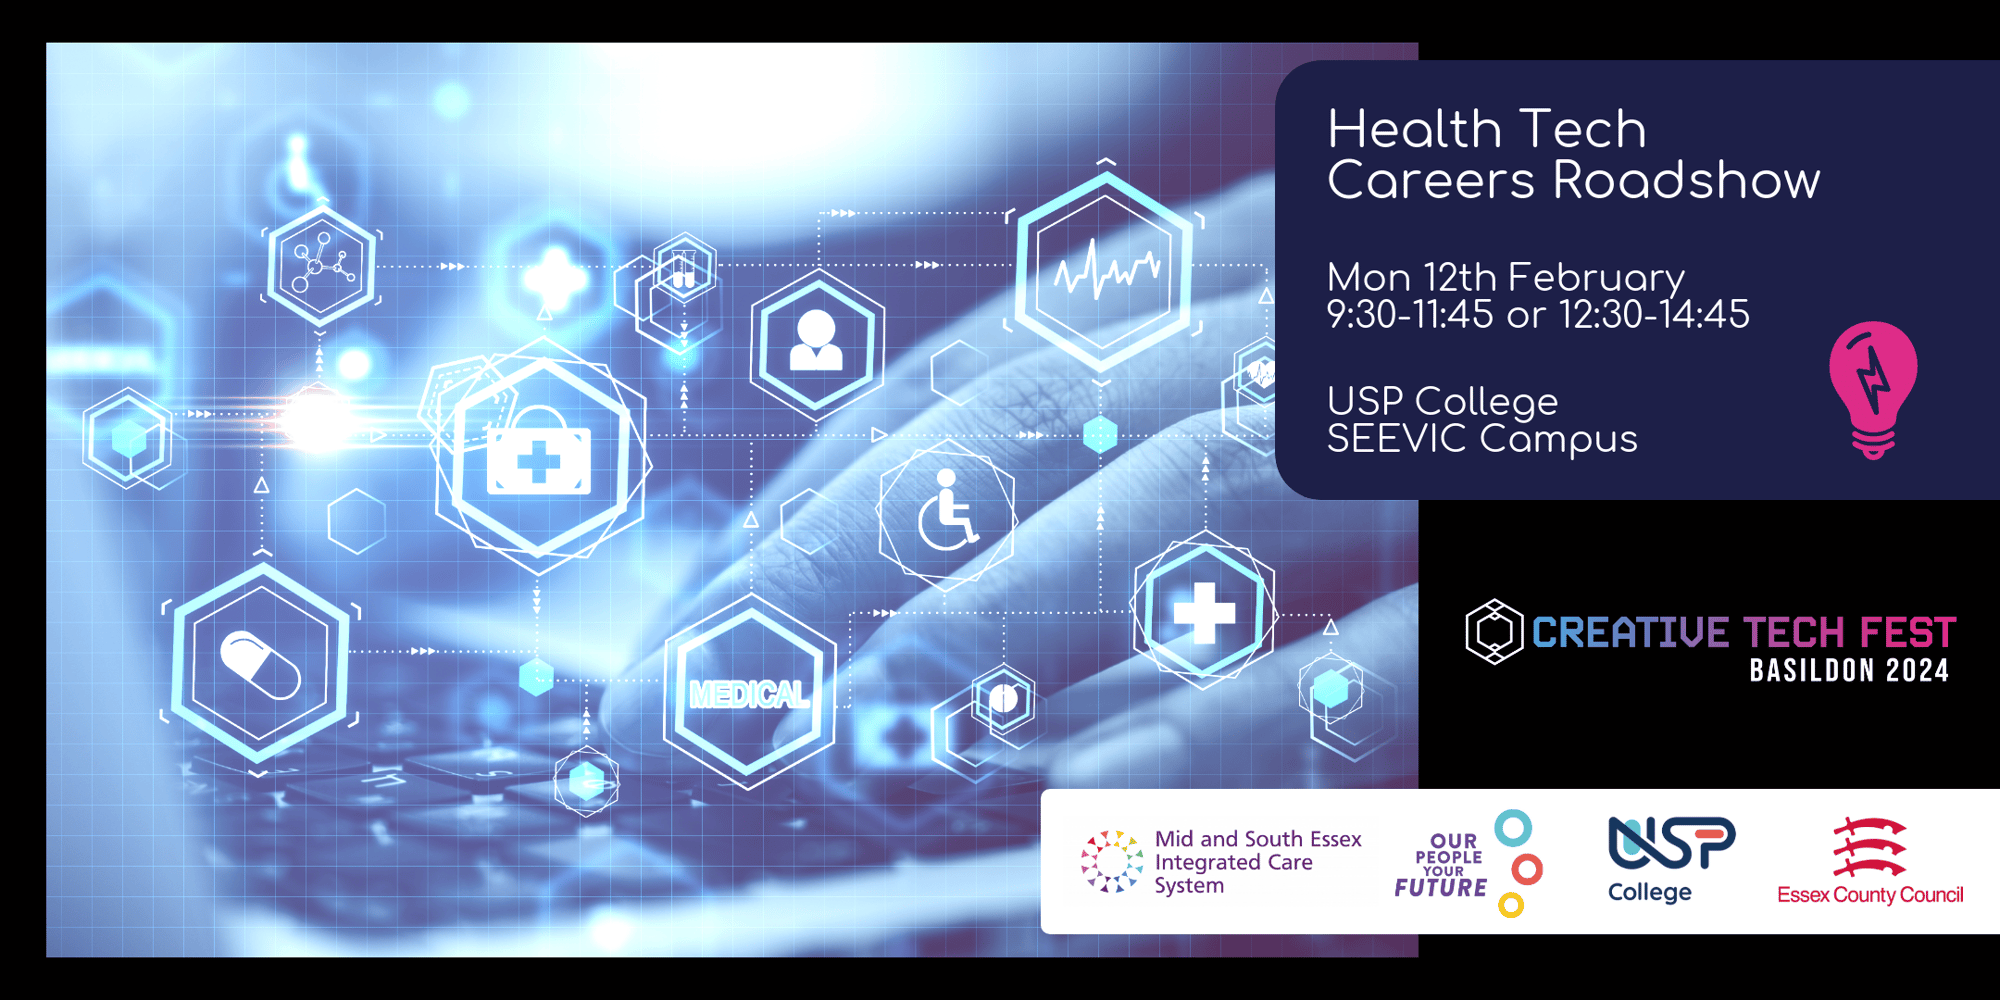 Health Tech Careers Roadshow Monday 12th Feb USP College SEEVIC campus. Logos - Creative Tech Fest Basildon, Mid and South Essex Integrated Care System, Our People Your Future, USP College, Essex County Council